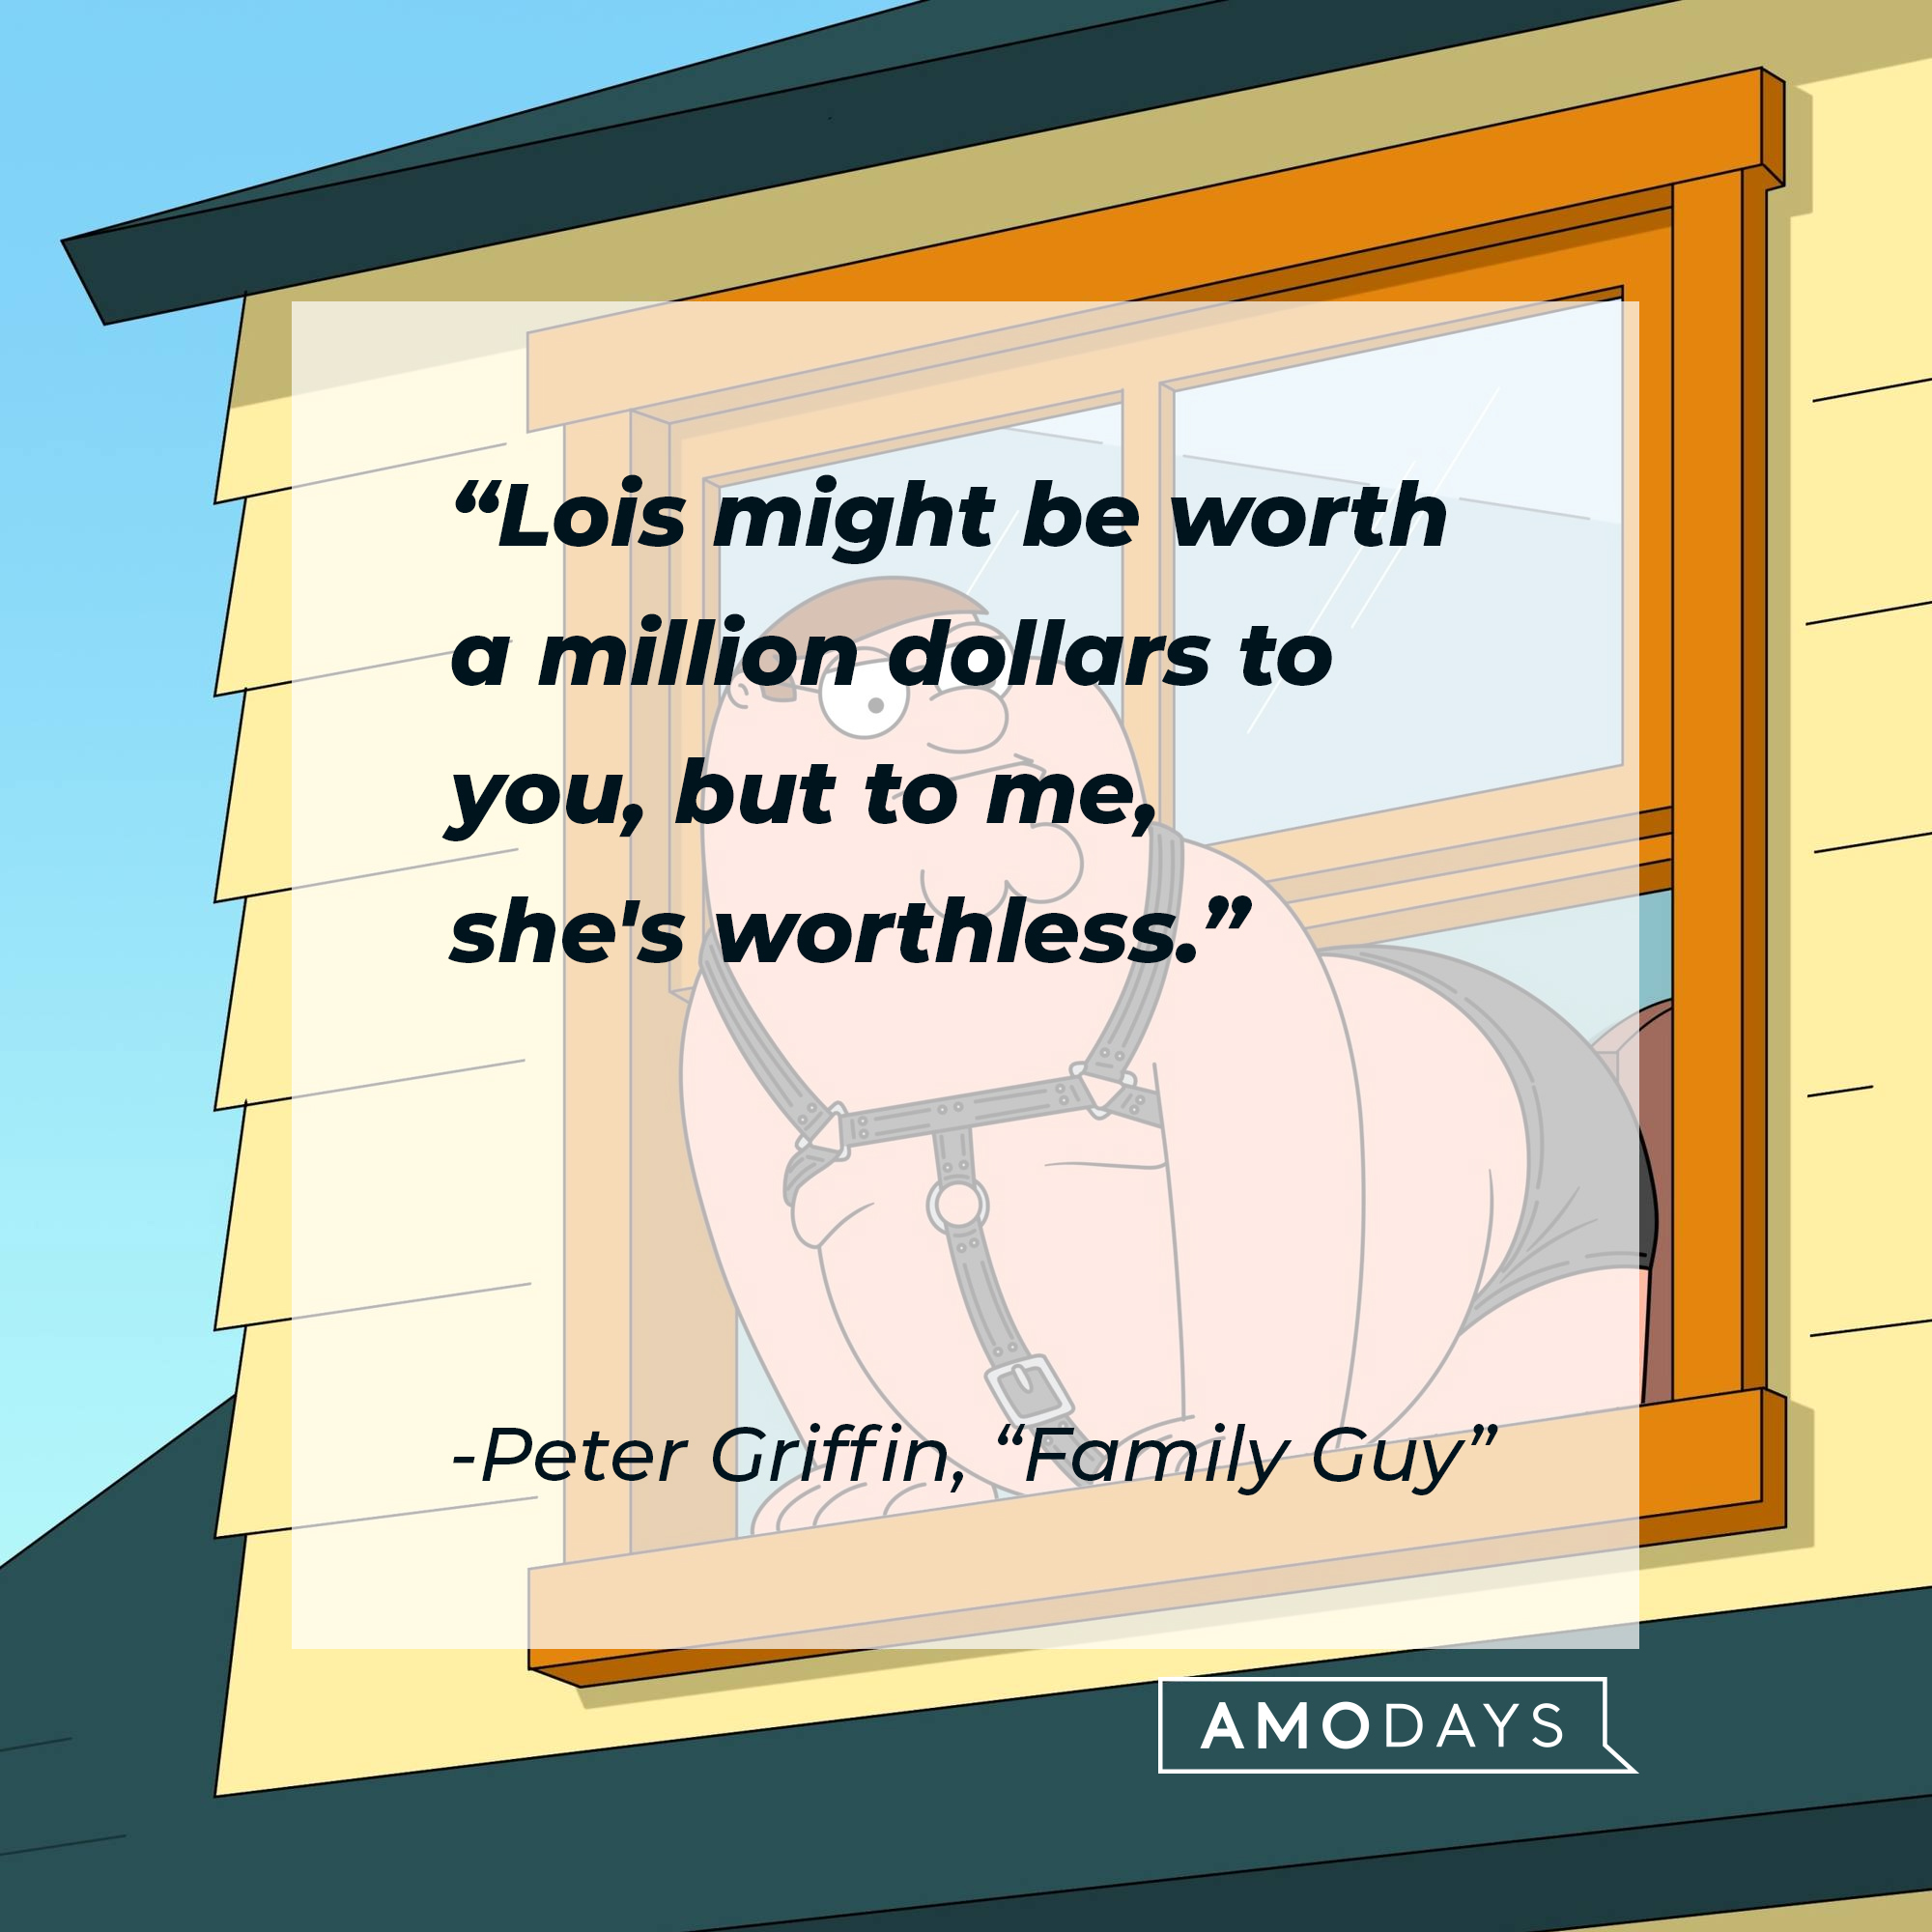 Peter Griffin's quote: "Lois might be worth a million dollars to you, but to me, she's worthless." | Source: facebook.com/FamilyGuy